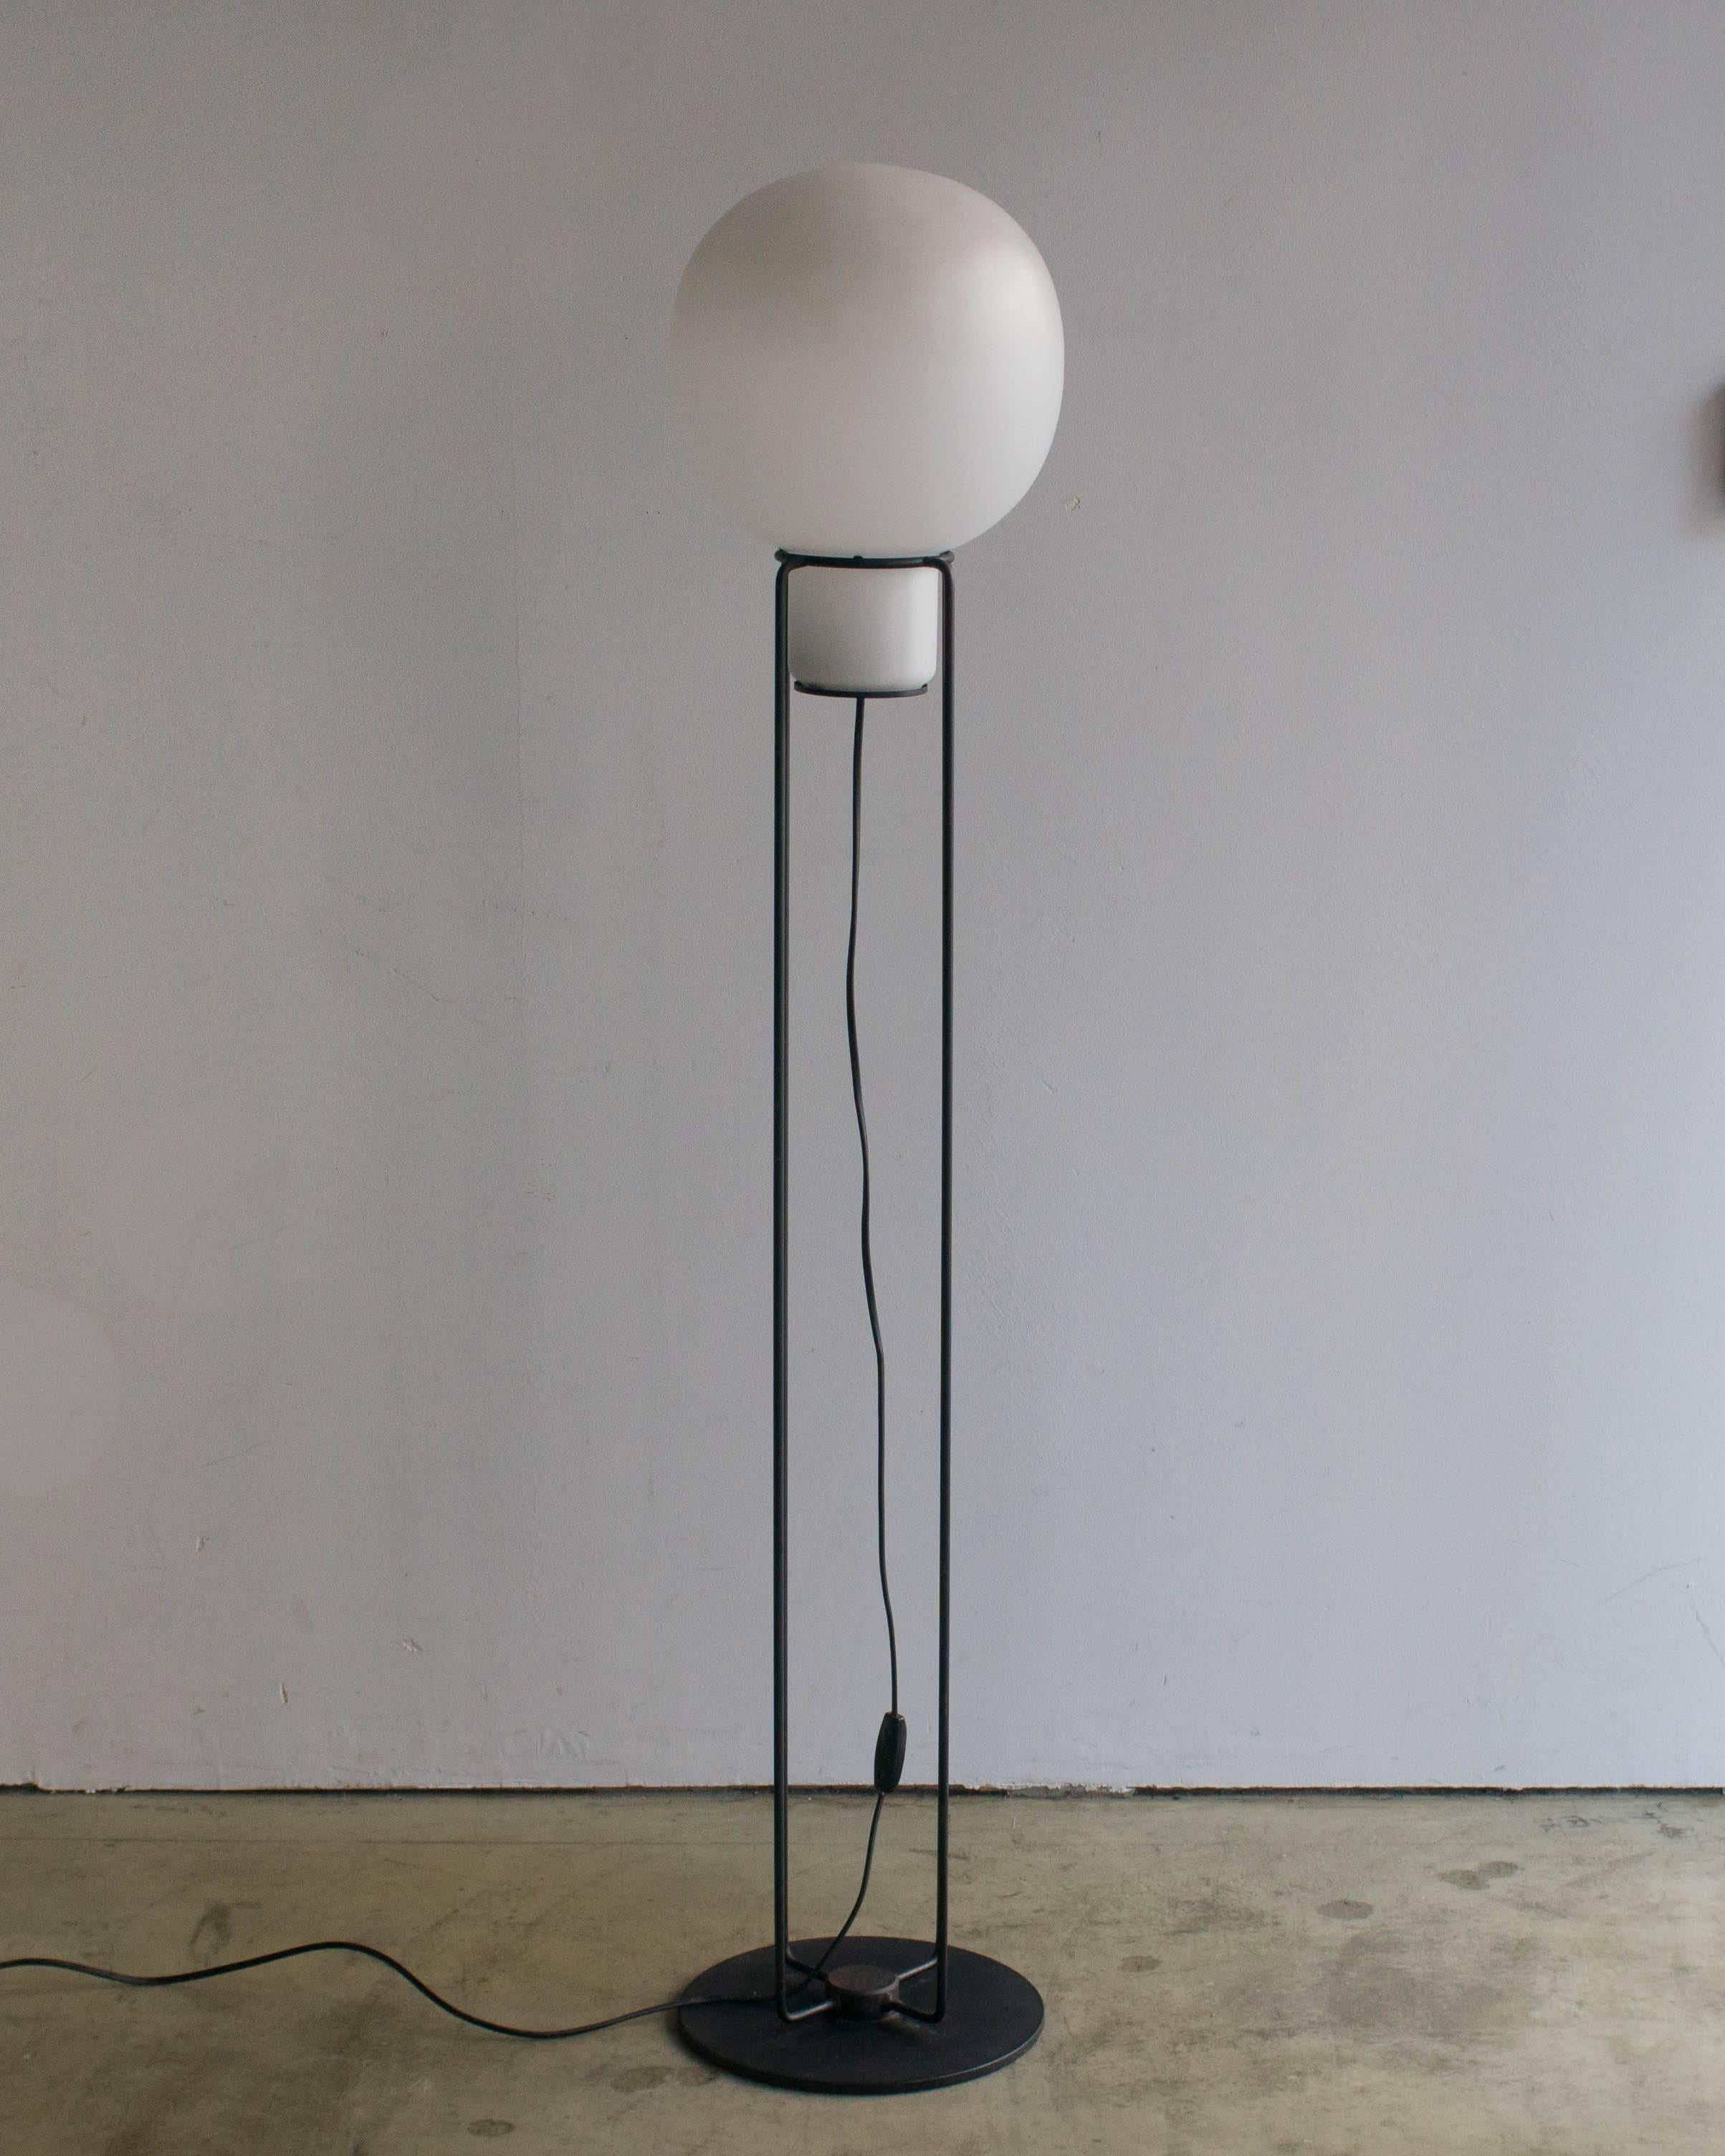 Floor lamp designed by Jo Nagahara for Yamagiwa. Made of glass and steel.
E26 bulb. White glass shade is put on four steels poles frame.